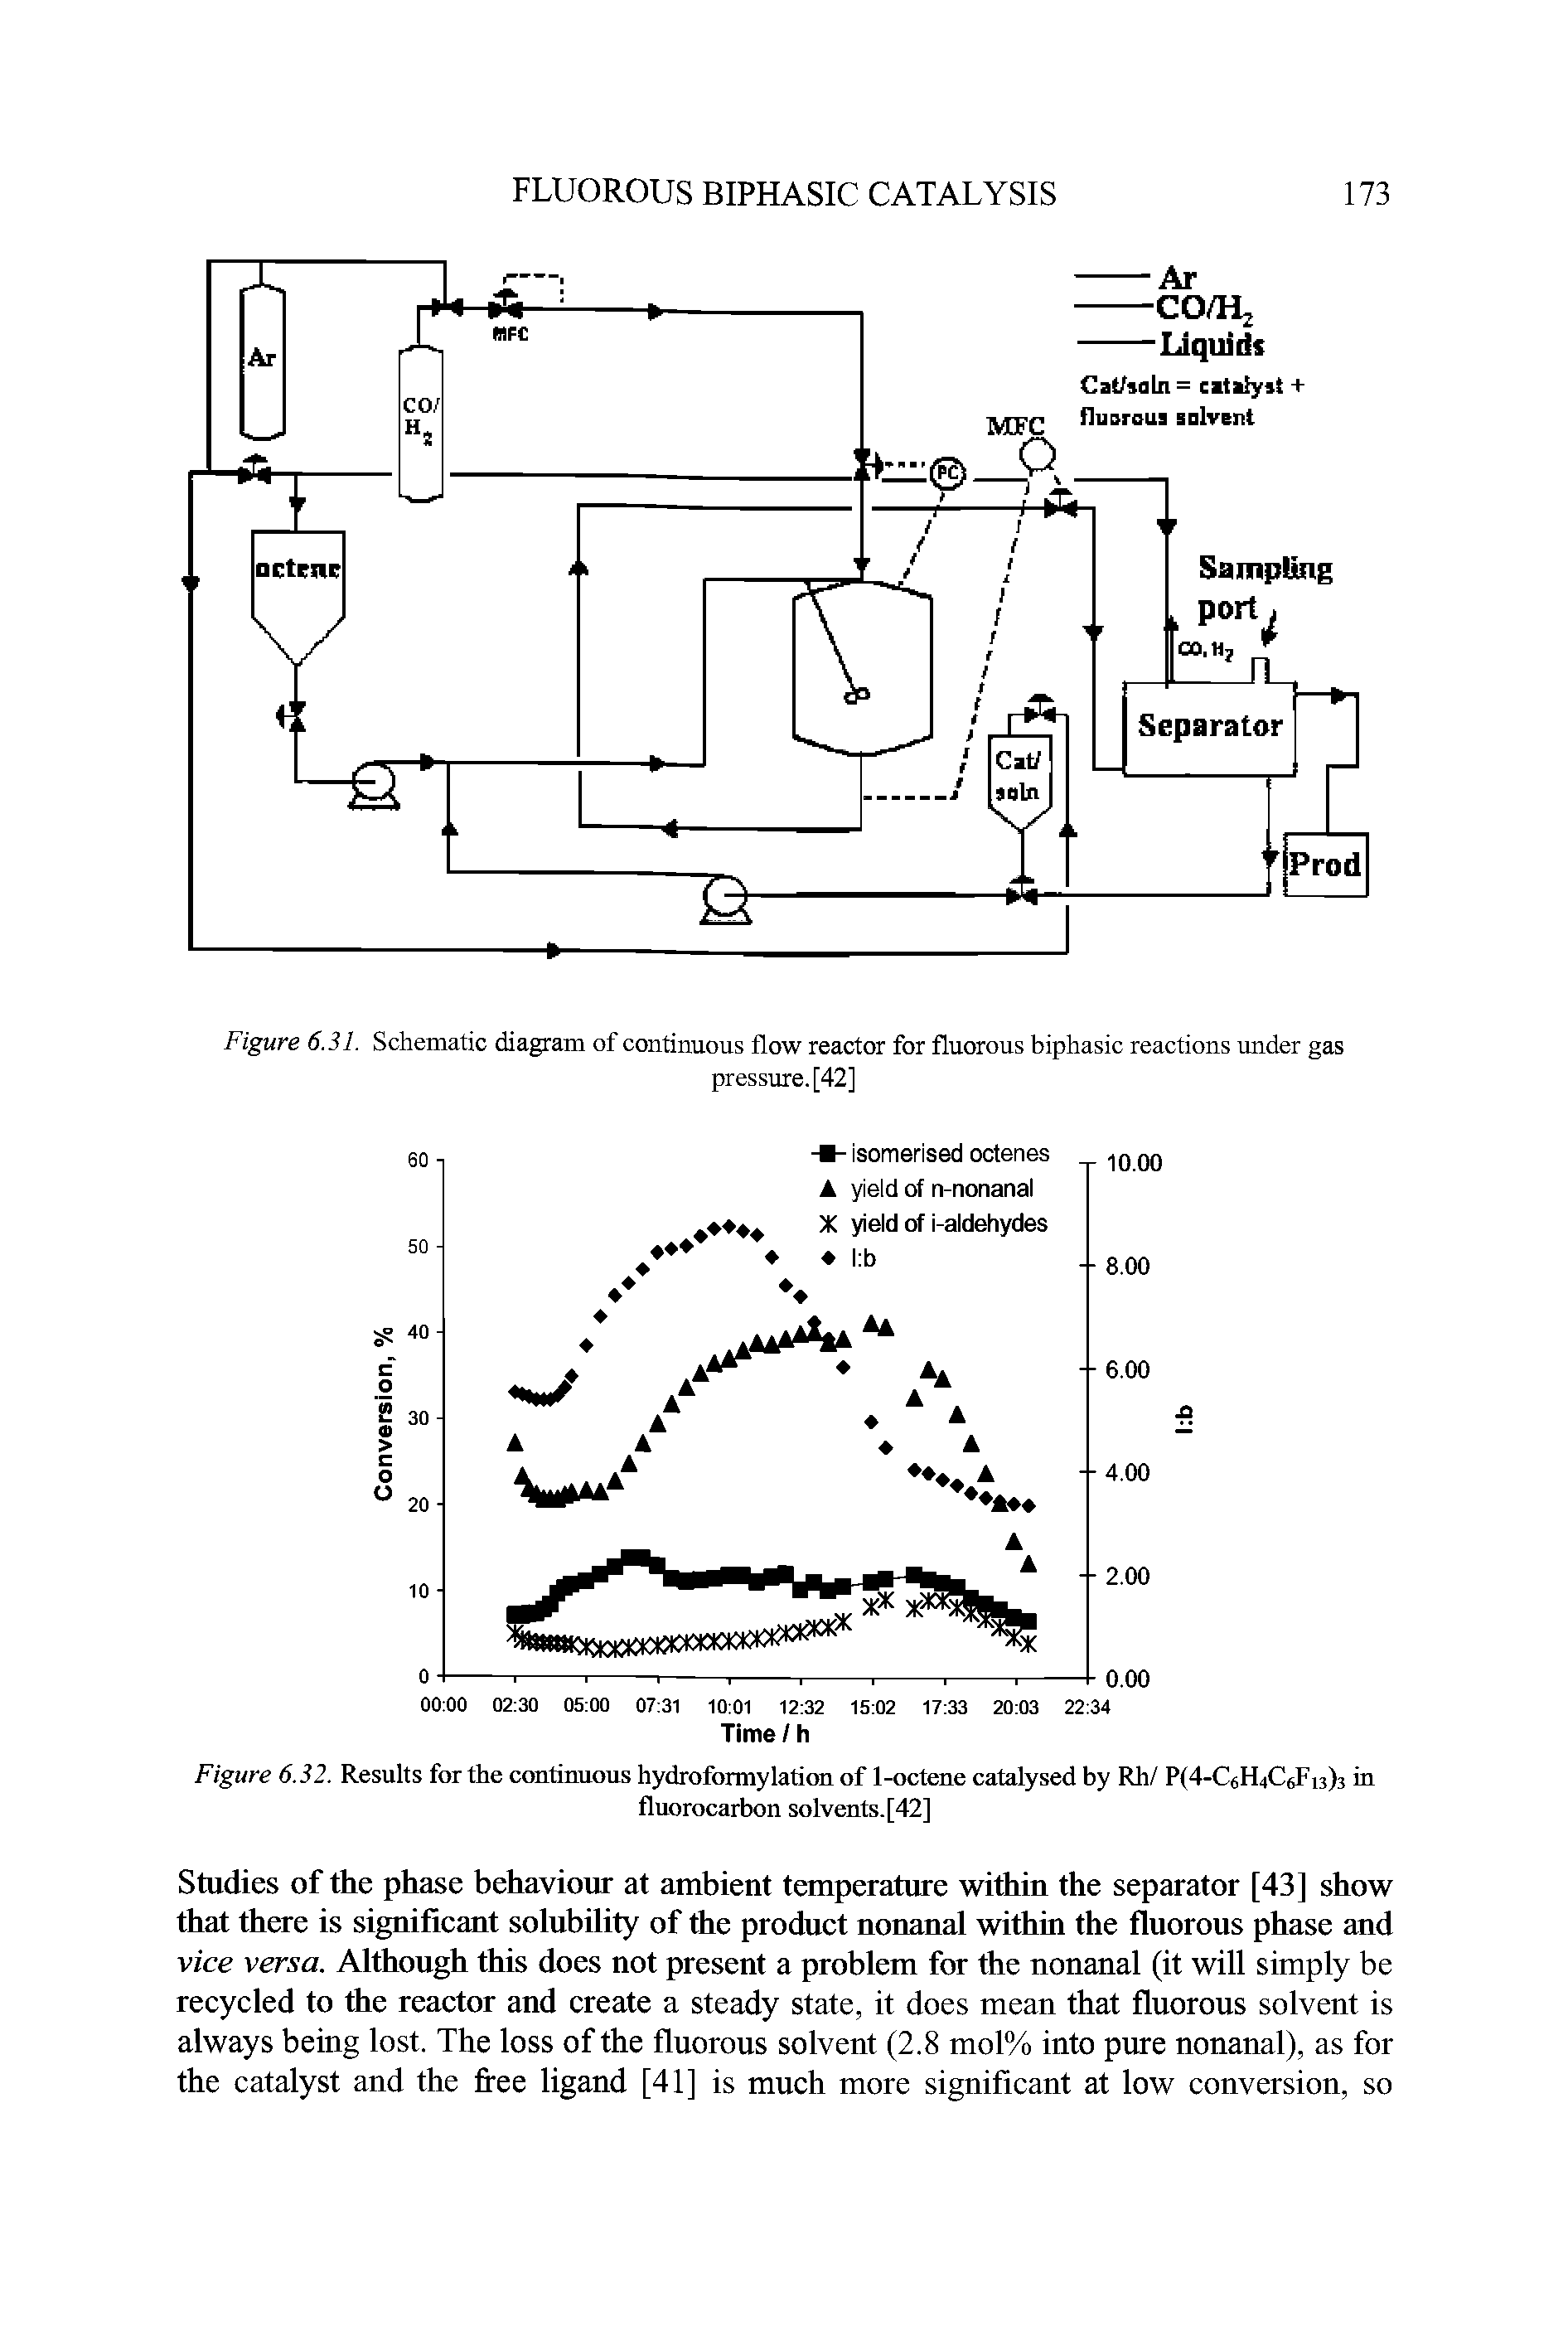 Figure 6.31. Schematic diagram of continuous flow reactor for fluorous biphasic reactions under gas...